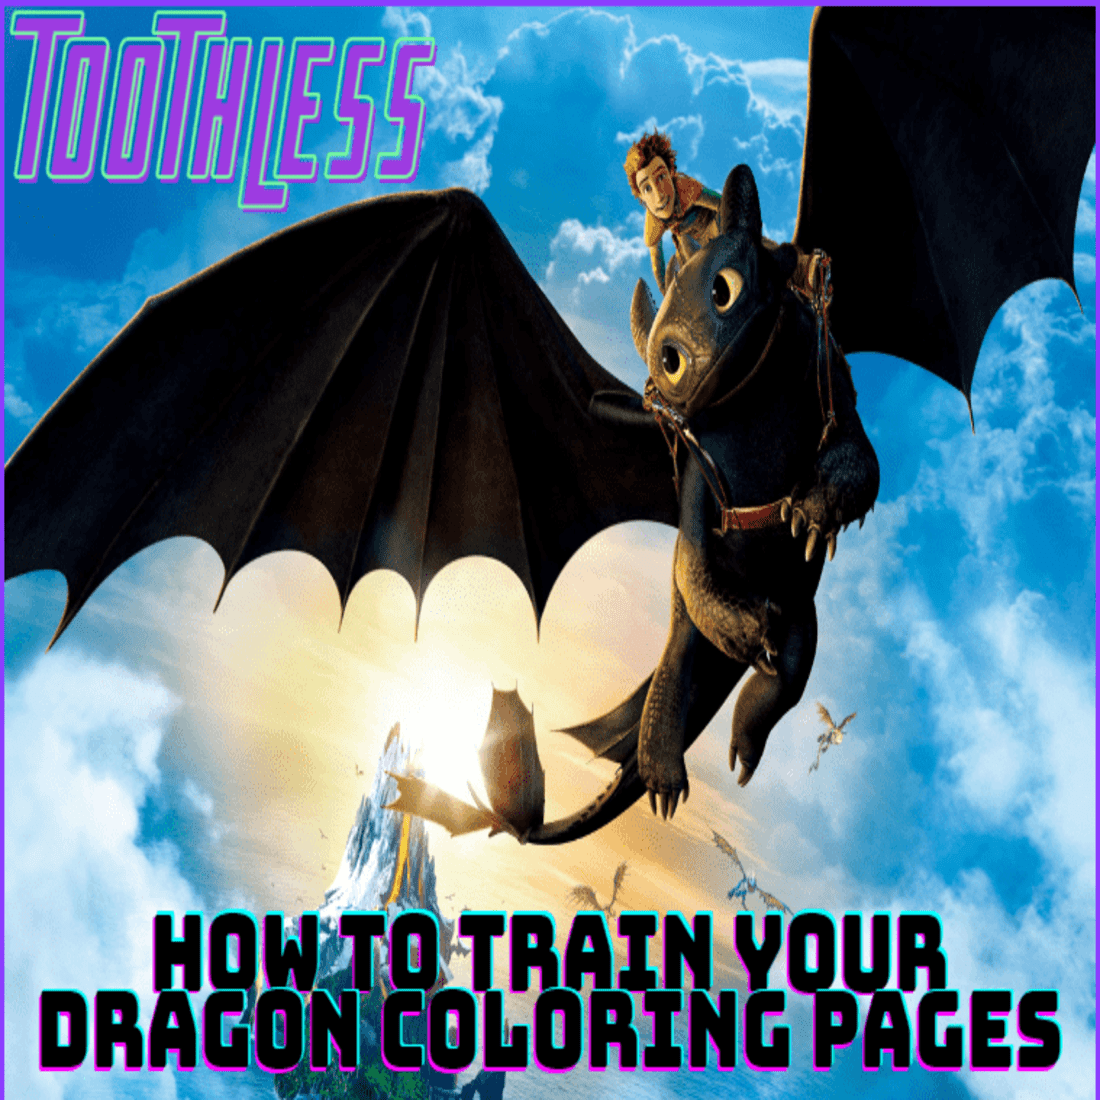 Toothless | How to Train Your Dragon cover image.